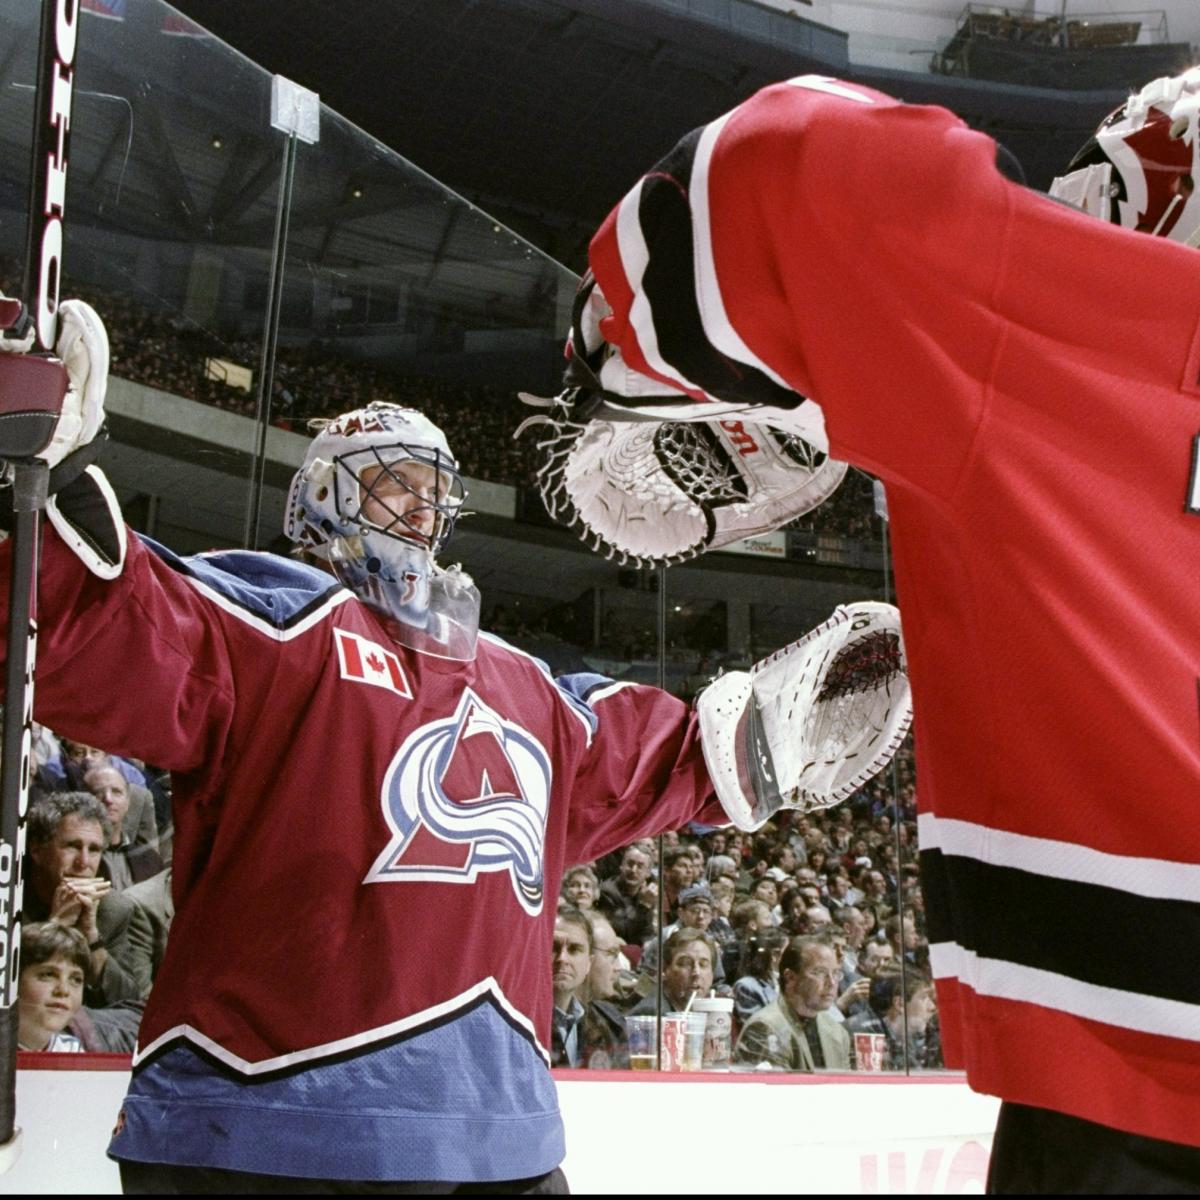 New Jersey Devils: Comparing Martin Brodeur To Greatest Of All Time